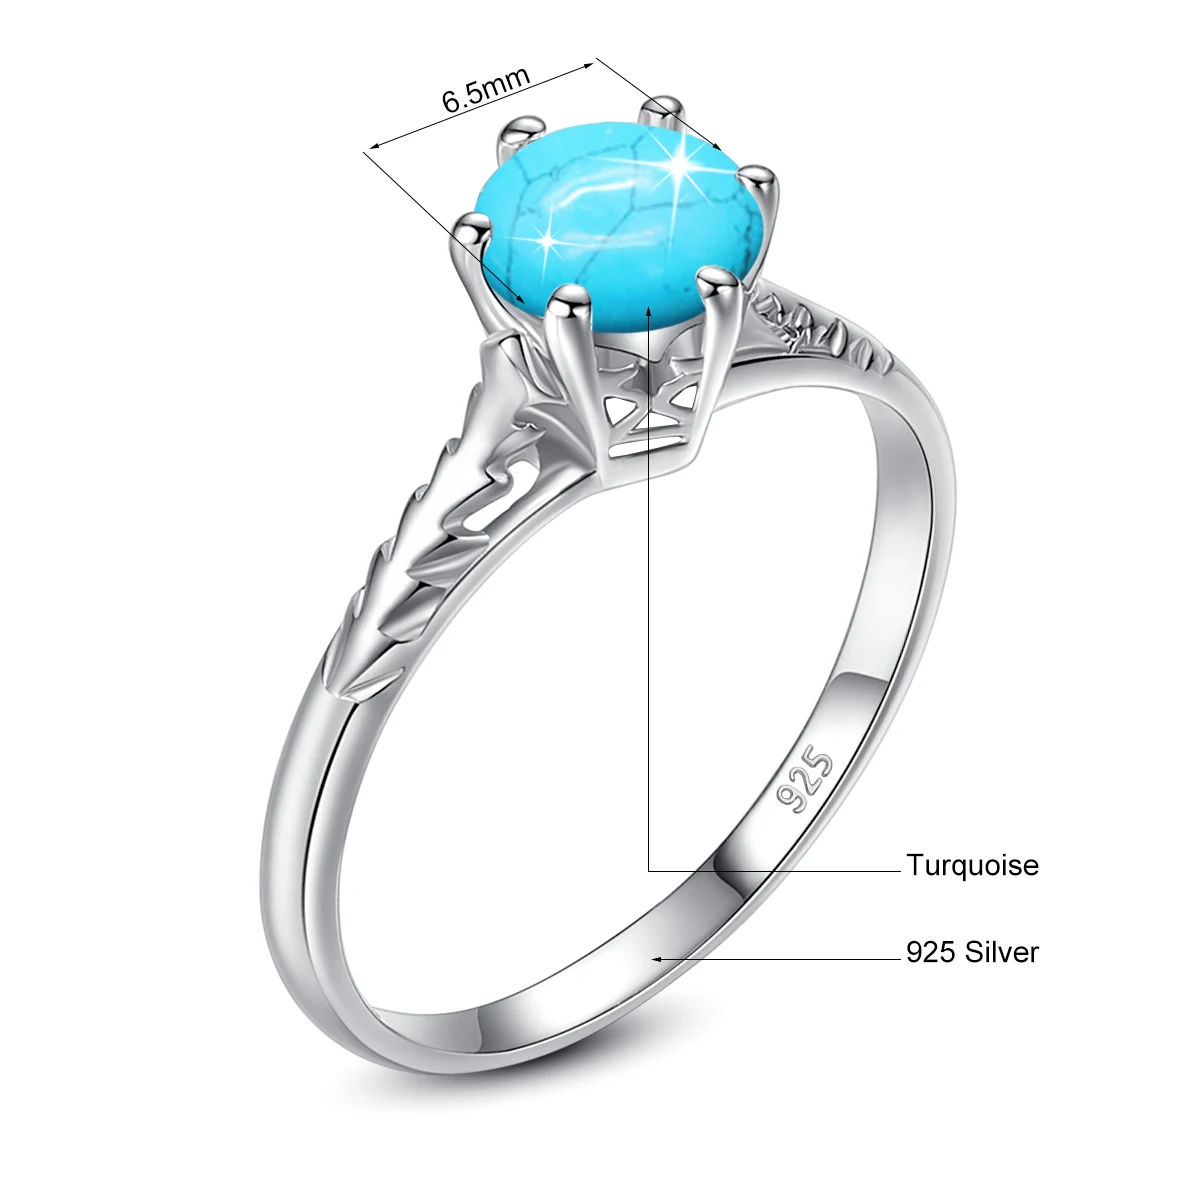 Silver 925 Real 6 Claws Turquoise Rings For Women Designer Jewelry Vinta... - $35.31